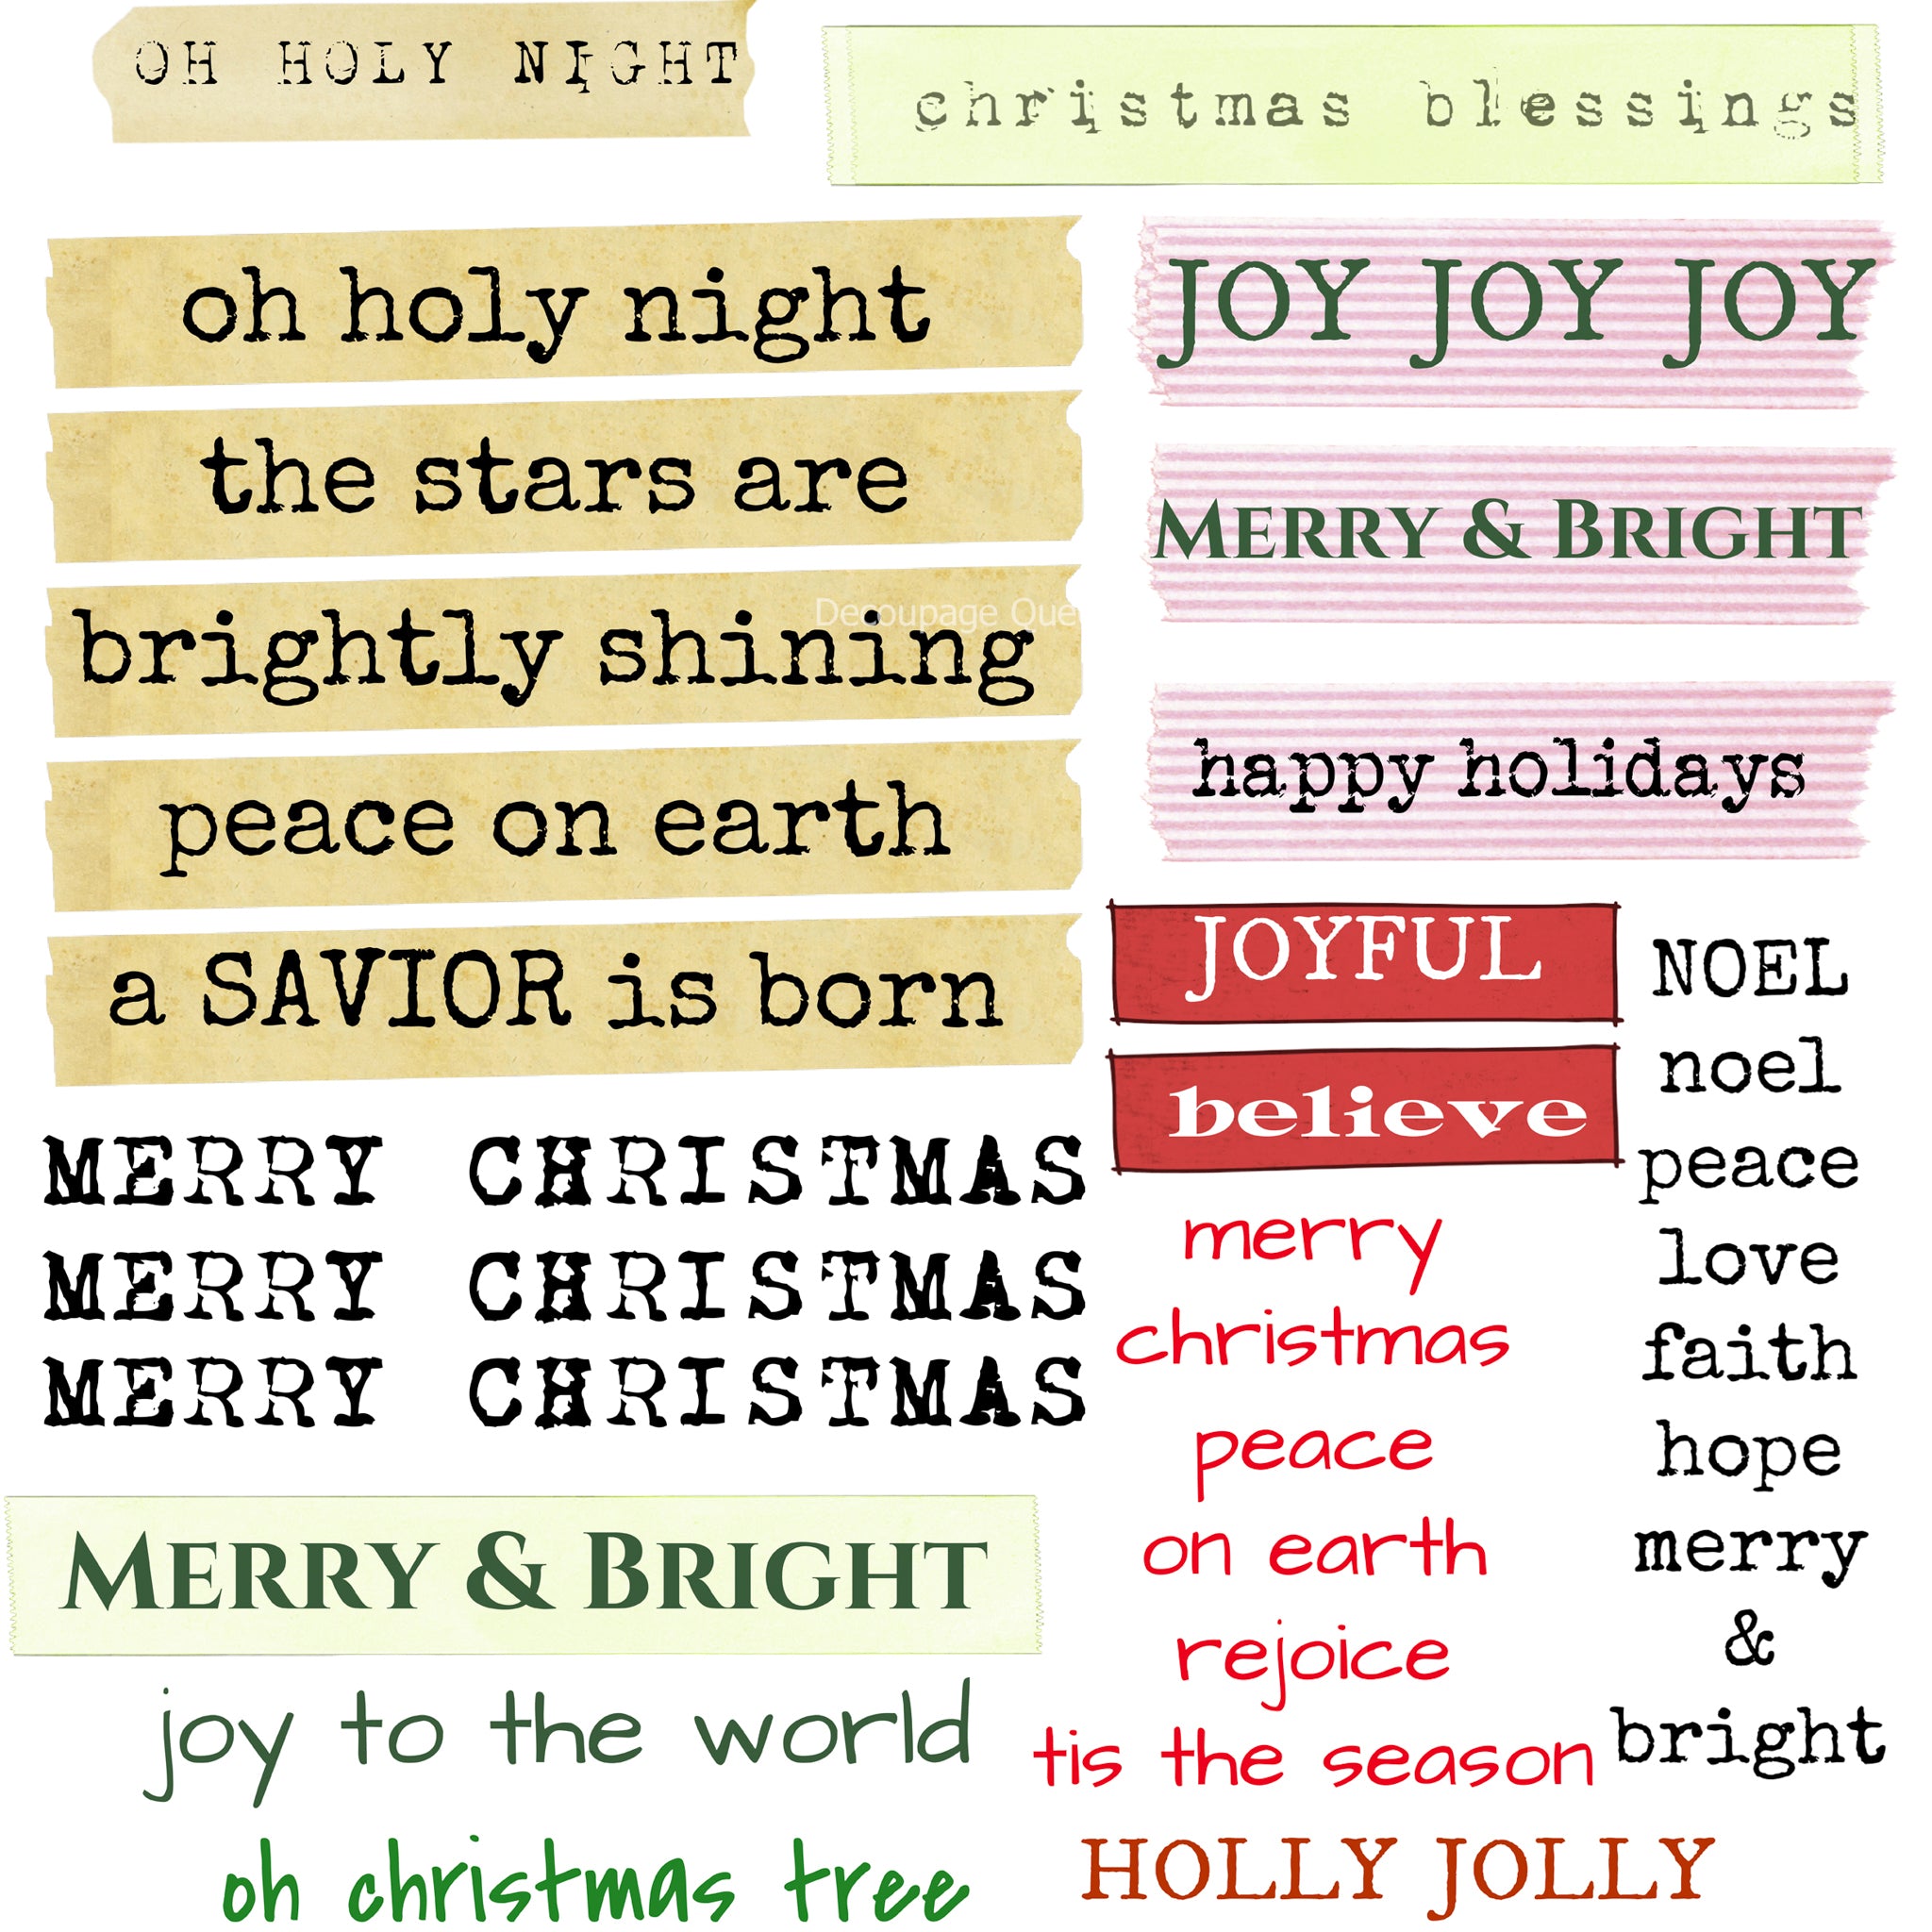 A3 rice paper design of Christmas song lyrics and sayings. 